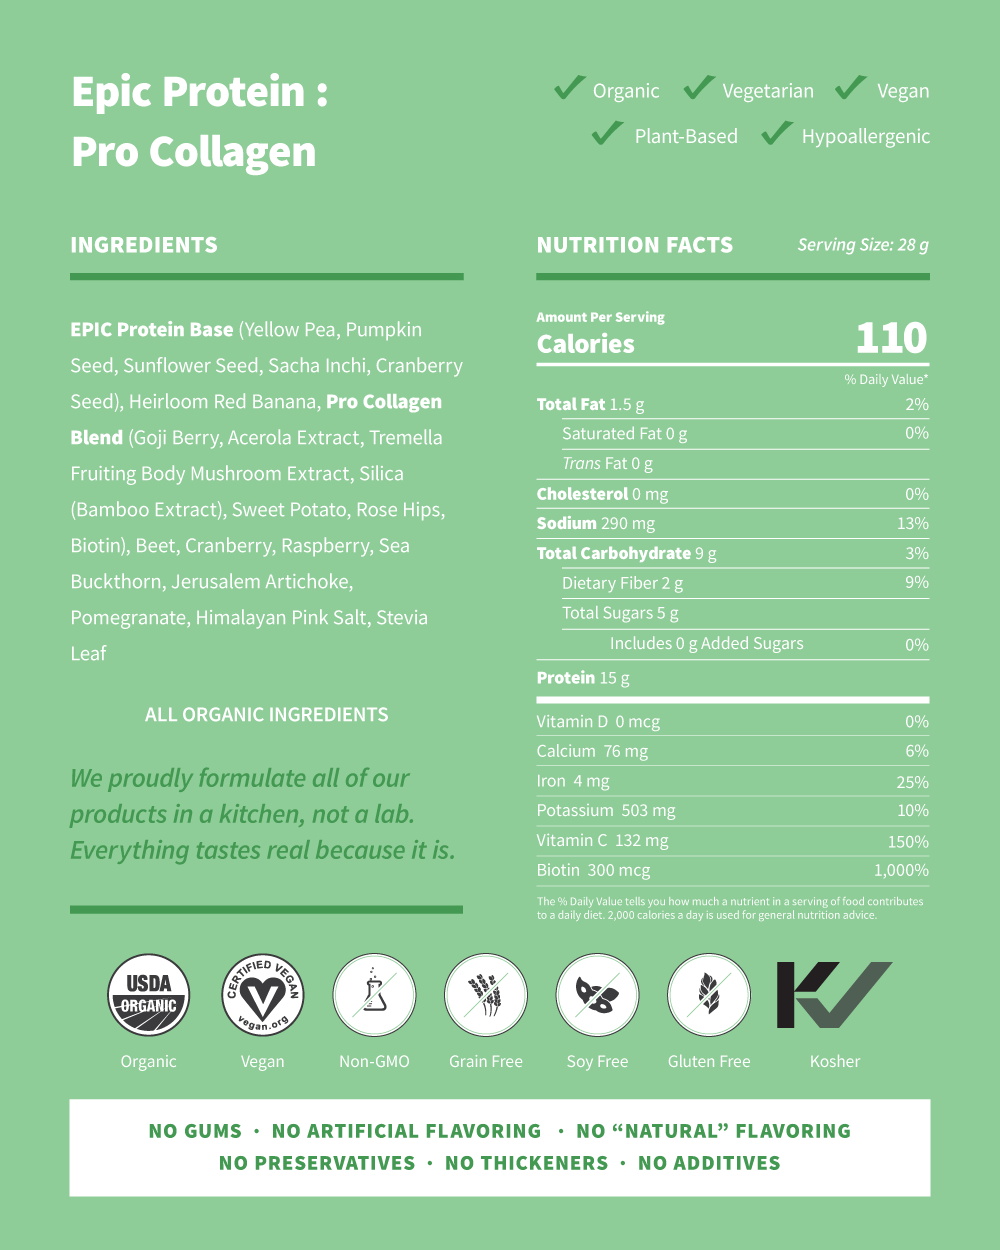 Epic Protein Pro Collagen Nutrition Facts